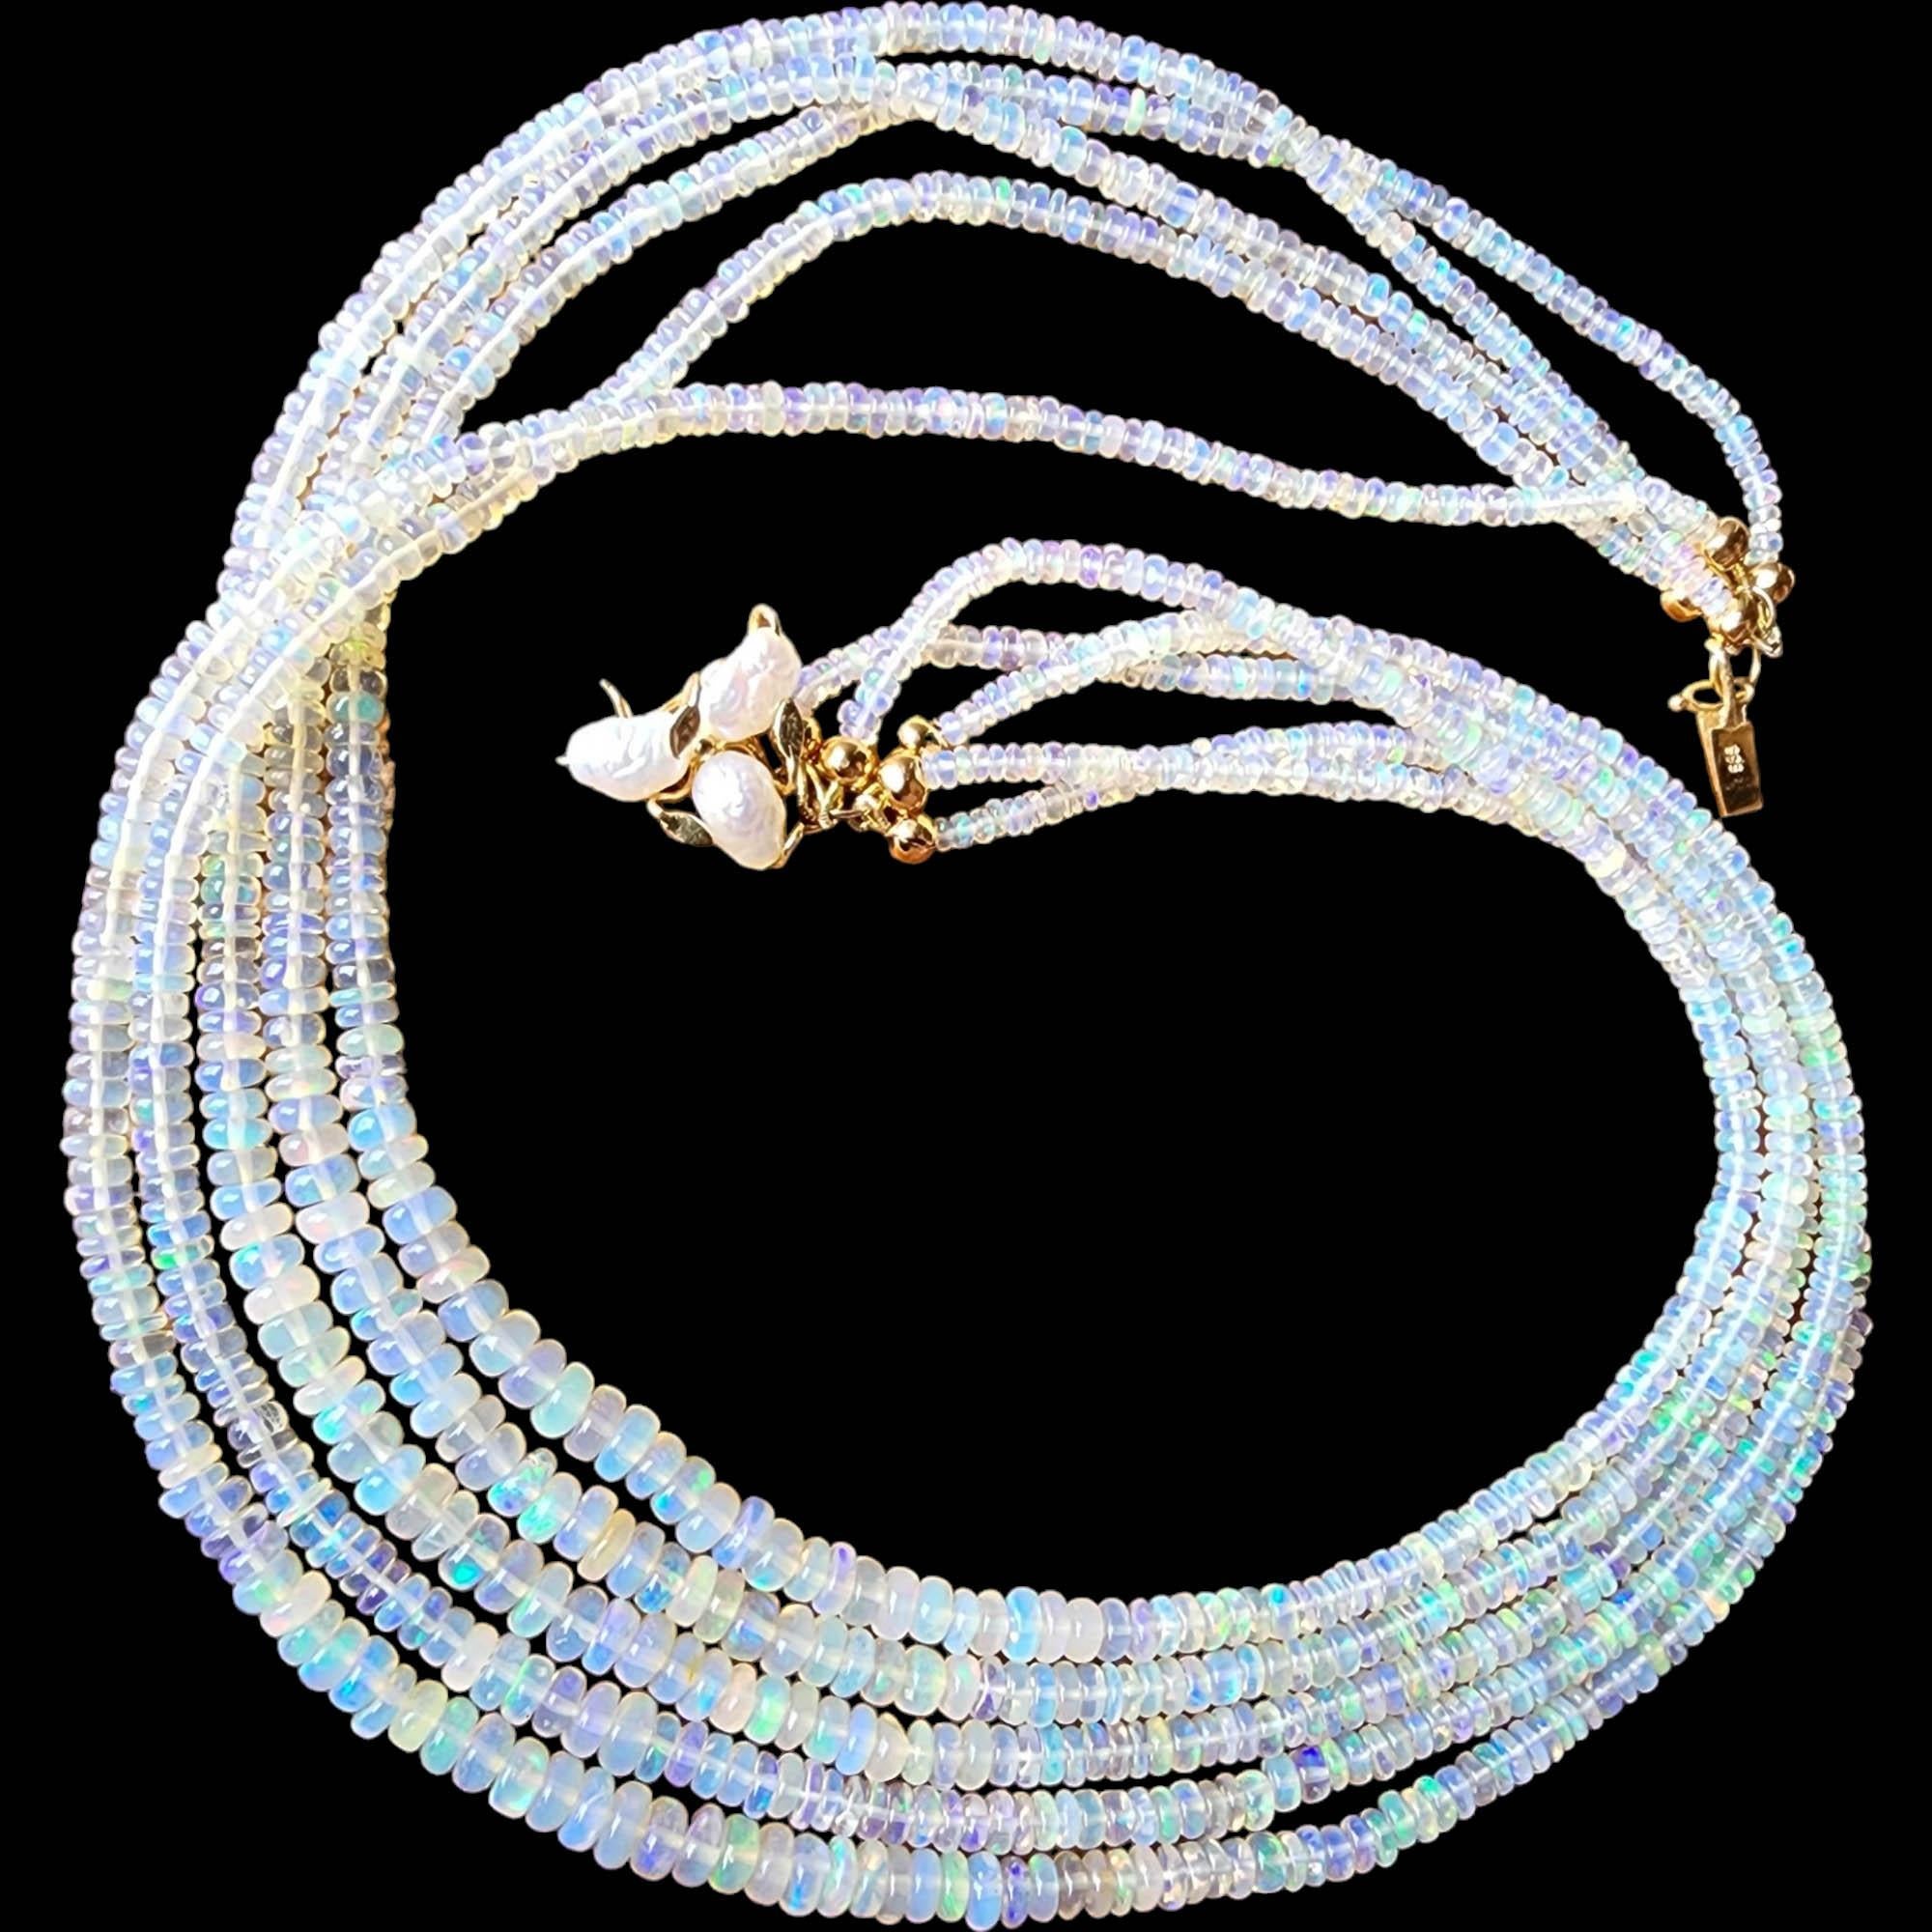 Artisan Vintage Multi-Strand Opal Bead Necklace, 14k Gold Clasp With Pearls For Sale